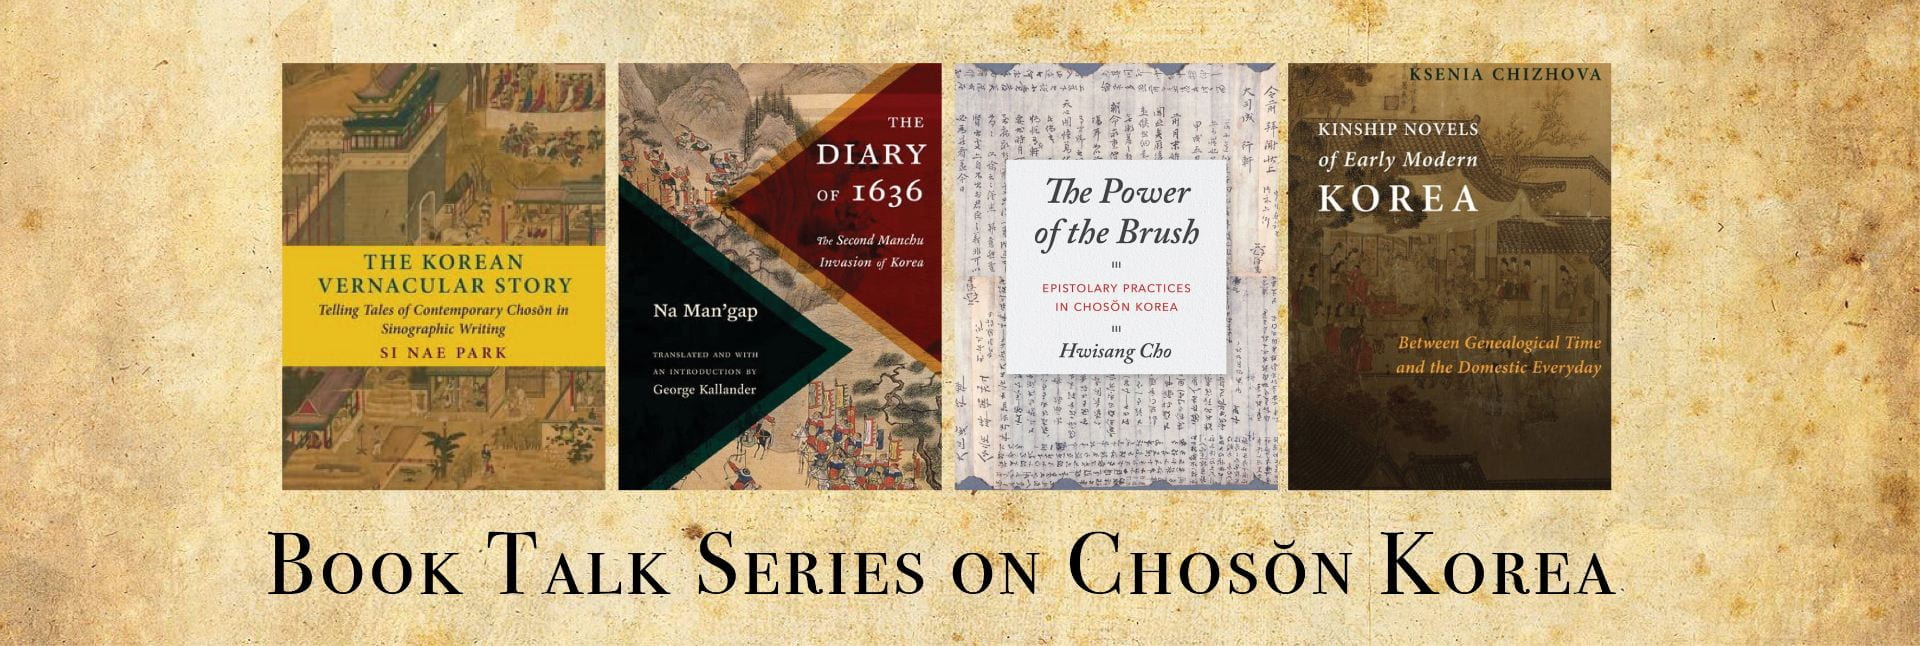 banner for the Book Talk Series on Choson Korea event series with four book covers